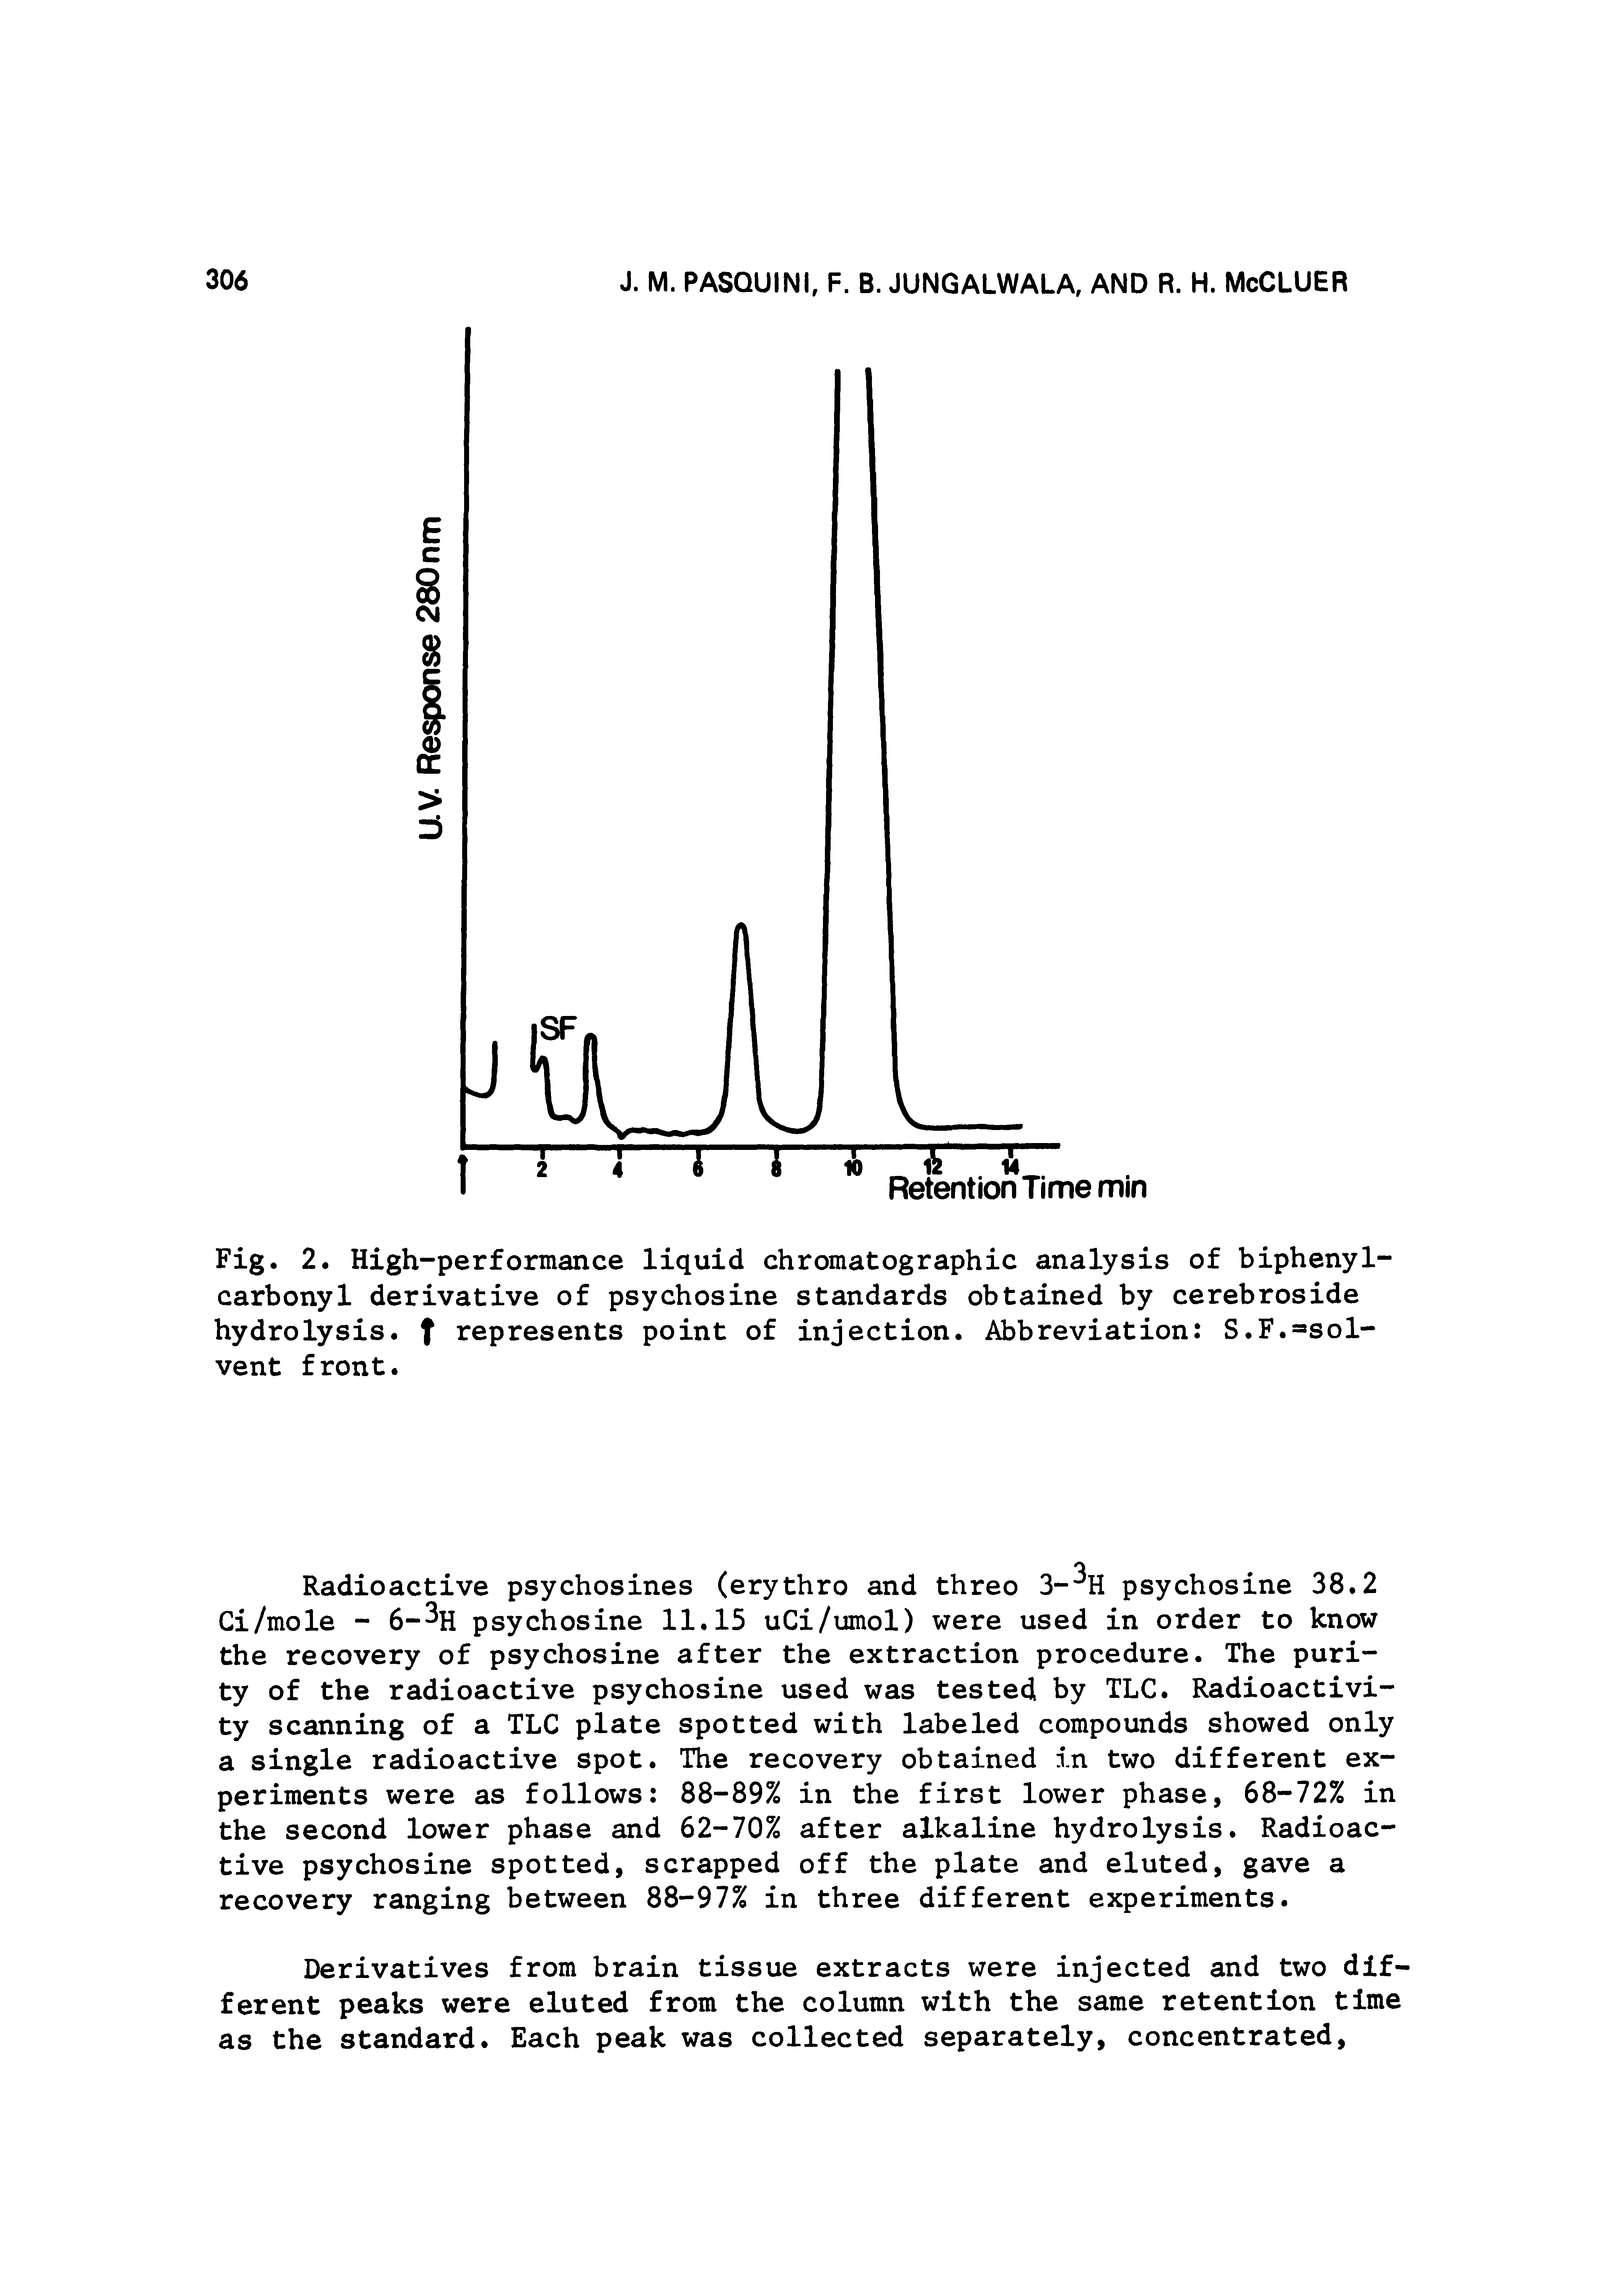 Fig. 2. High-performance liquid chromatographic analysis of biphenyl-carbonyl derivative of psychosine standards obtained by cerebroside hydrolysis, f represents point of injection. Abbreviation S.F.= sol-vent front.